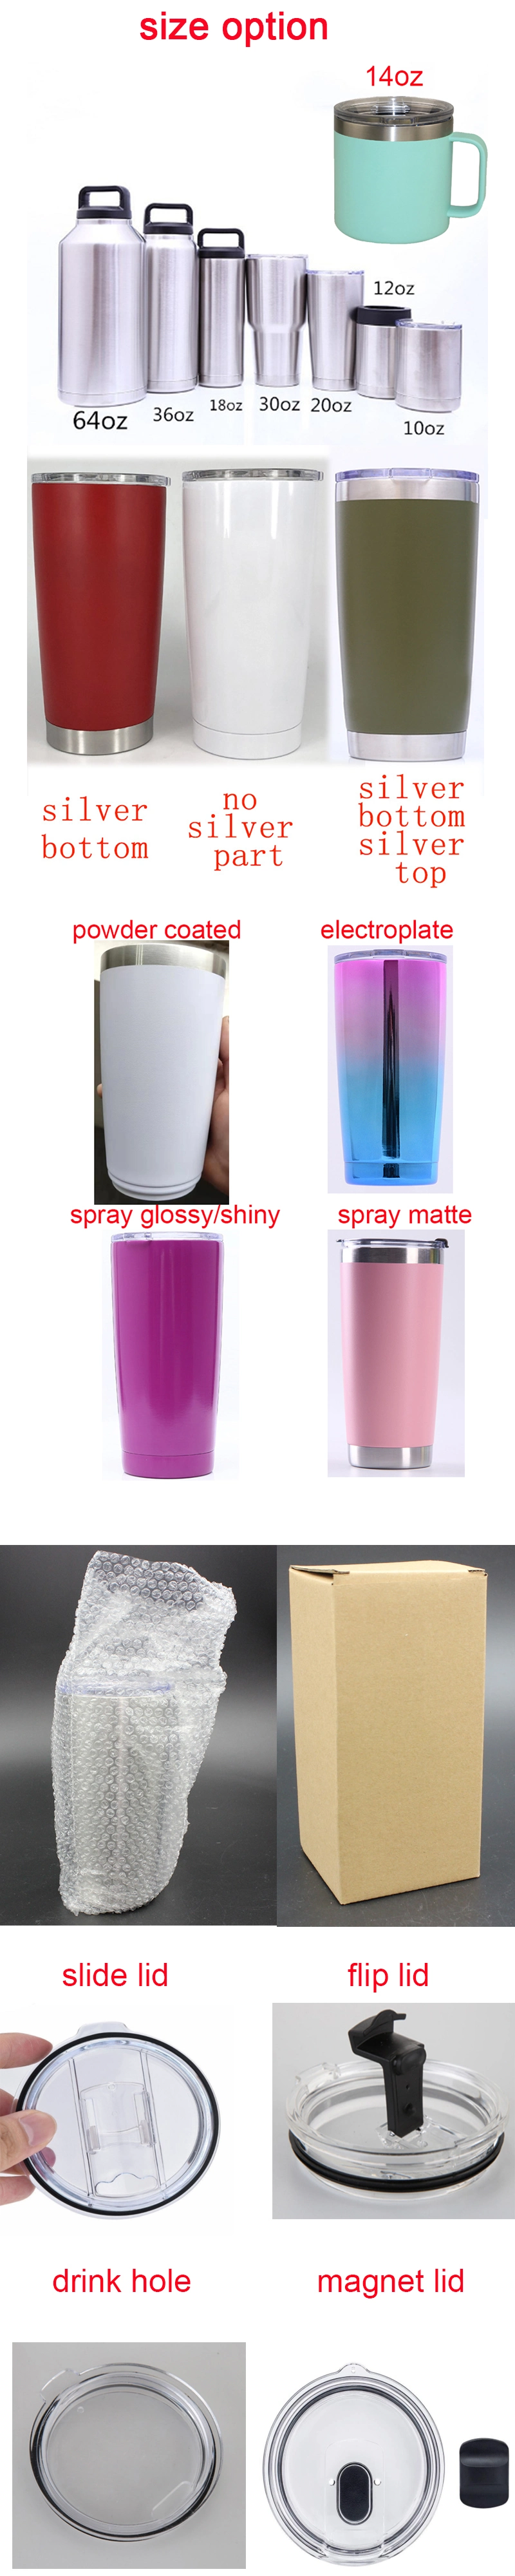 Double Layer Stainless Steel Water Vacuum Sealed Water Mug Water Cup 30oz 20oz 14oz Thermos Mug Thermal Tumbler